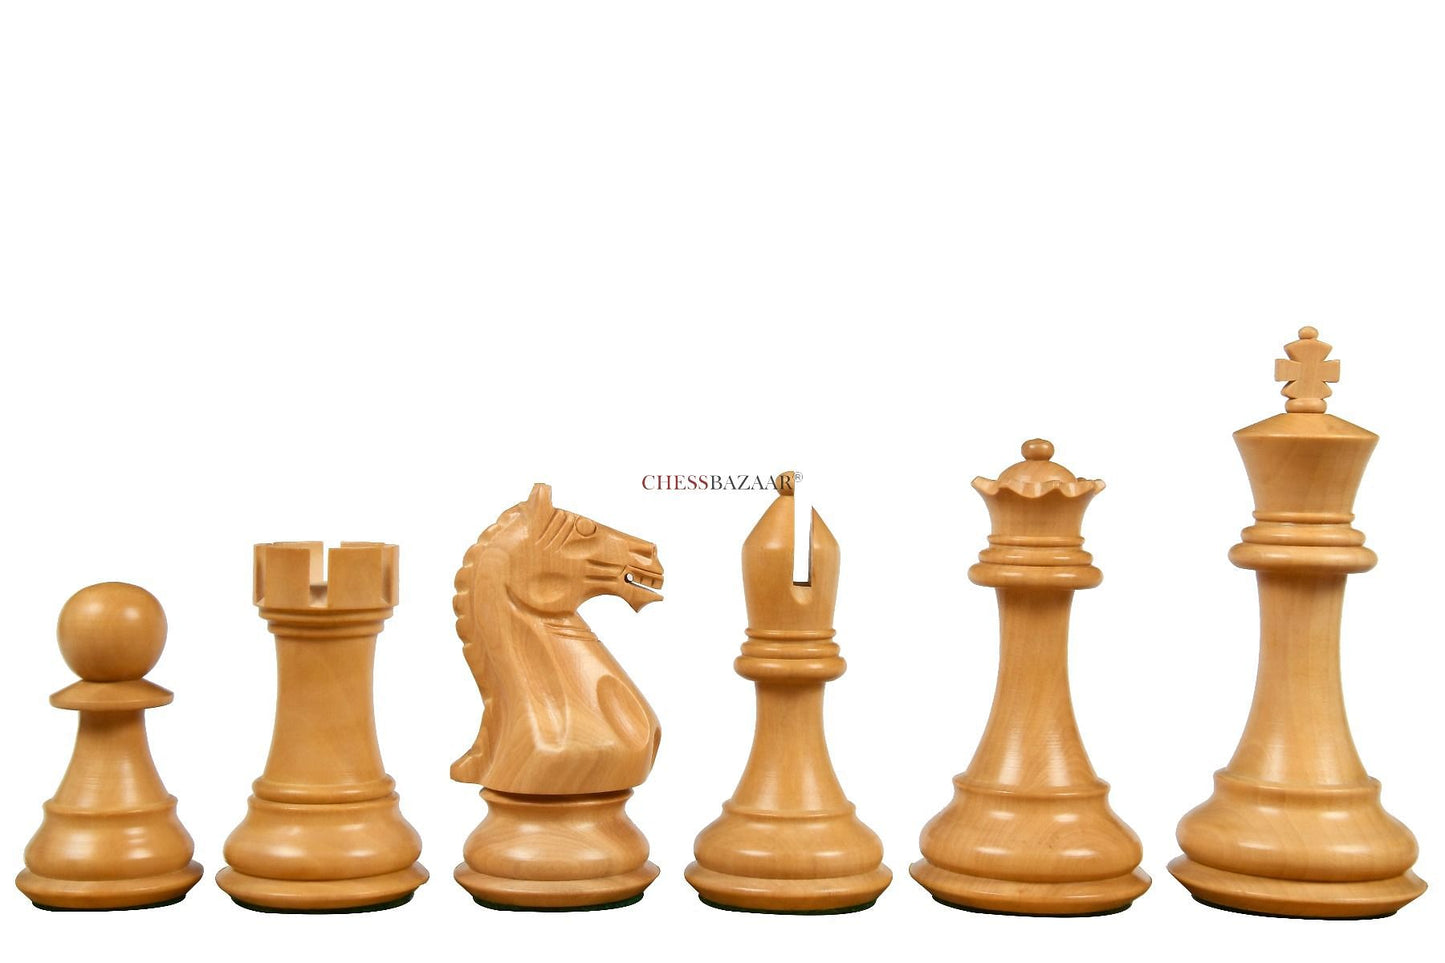 Fierce Knight Staunton Series Chess Pieces in Rosewood & Box Wood - 4.1" King